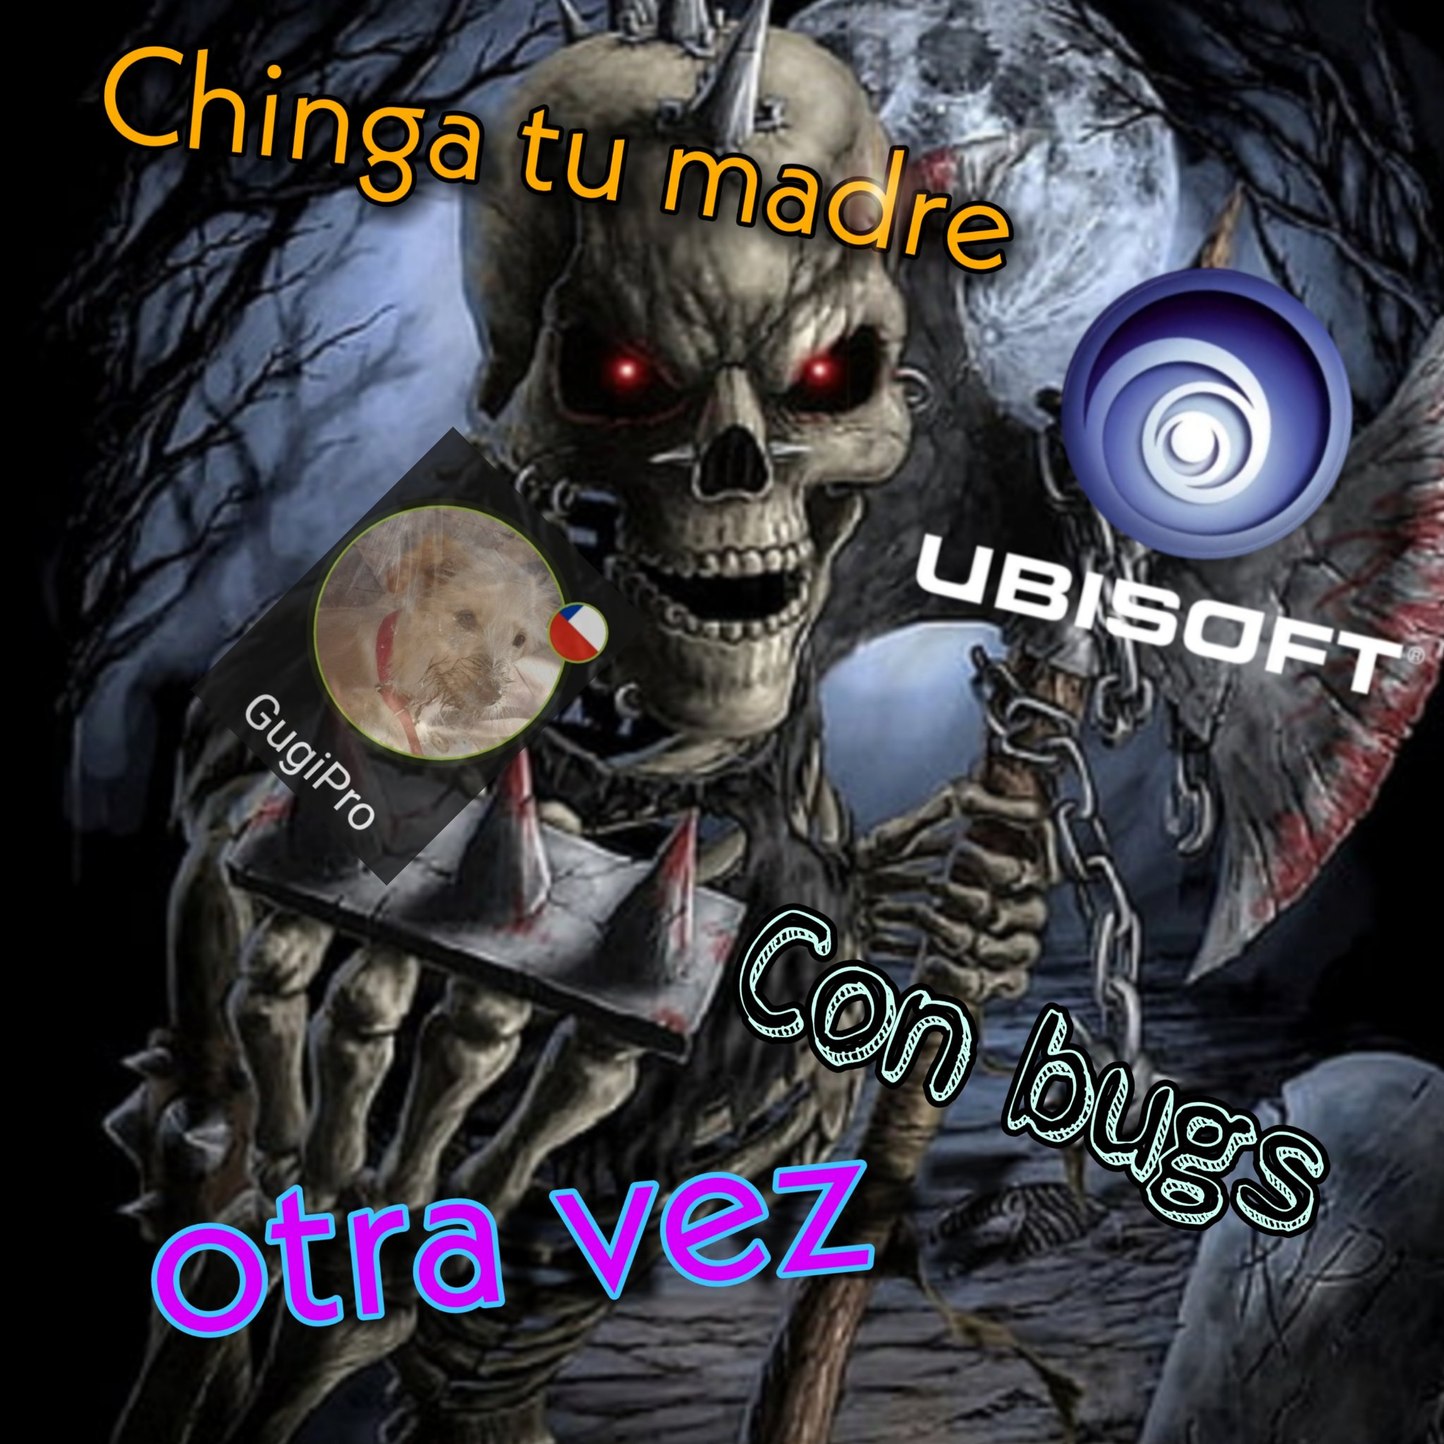 Asies ma soy chitposter - meme